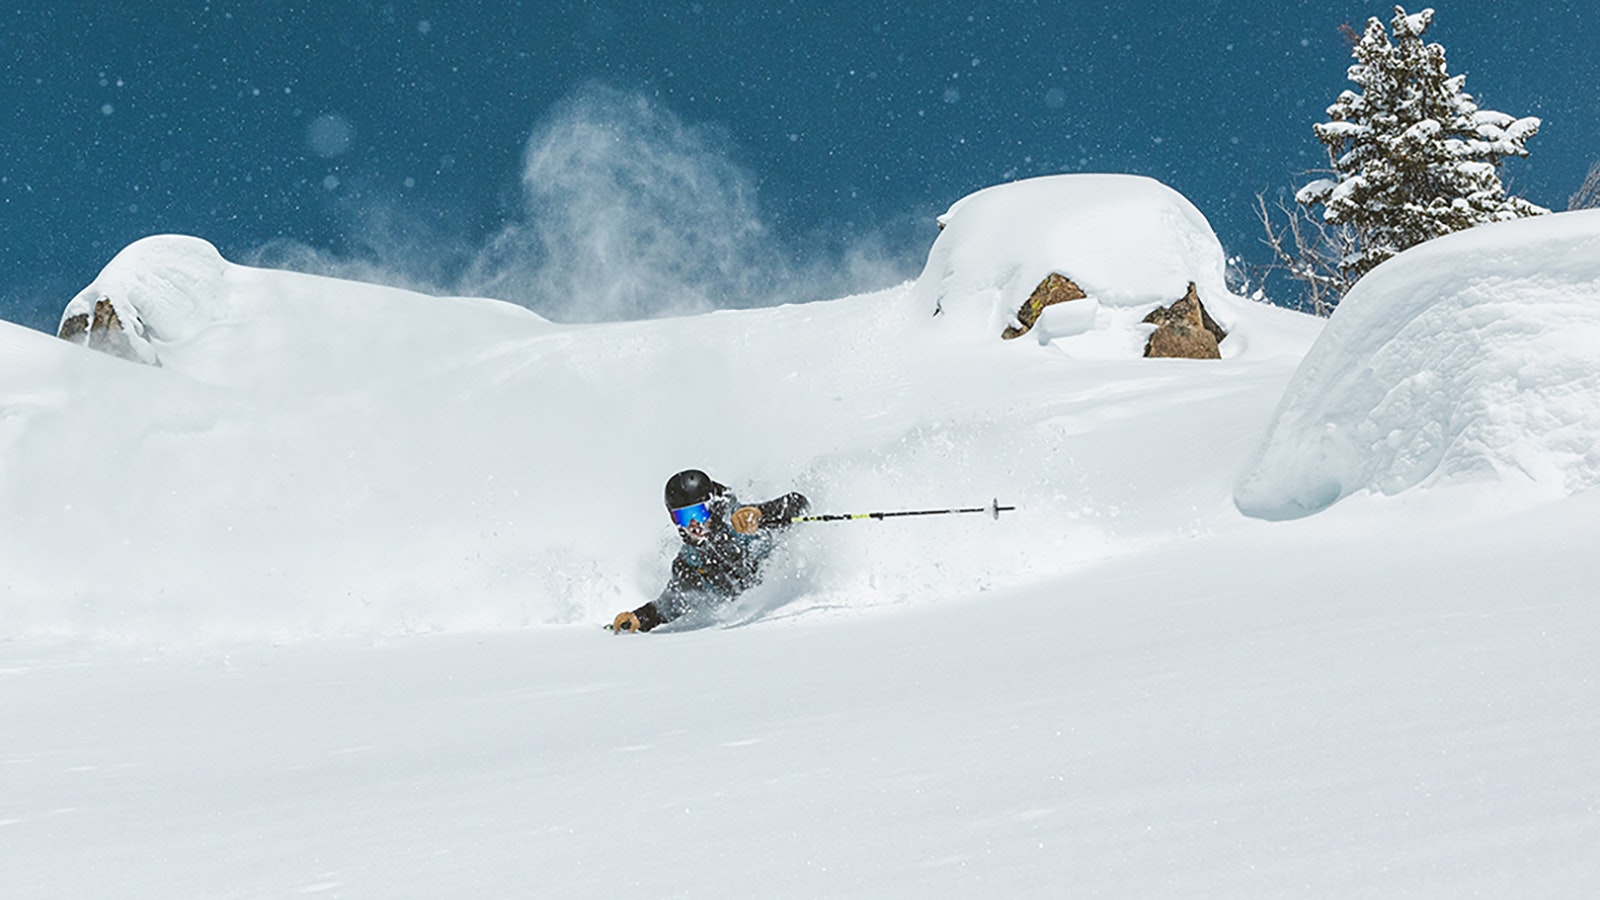 Jackson Hole Mountain Resort recorded a record 595 inches of snow this past season.